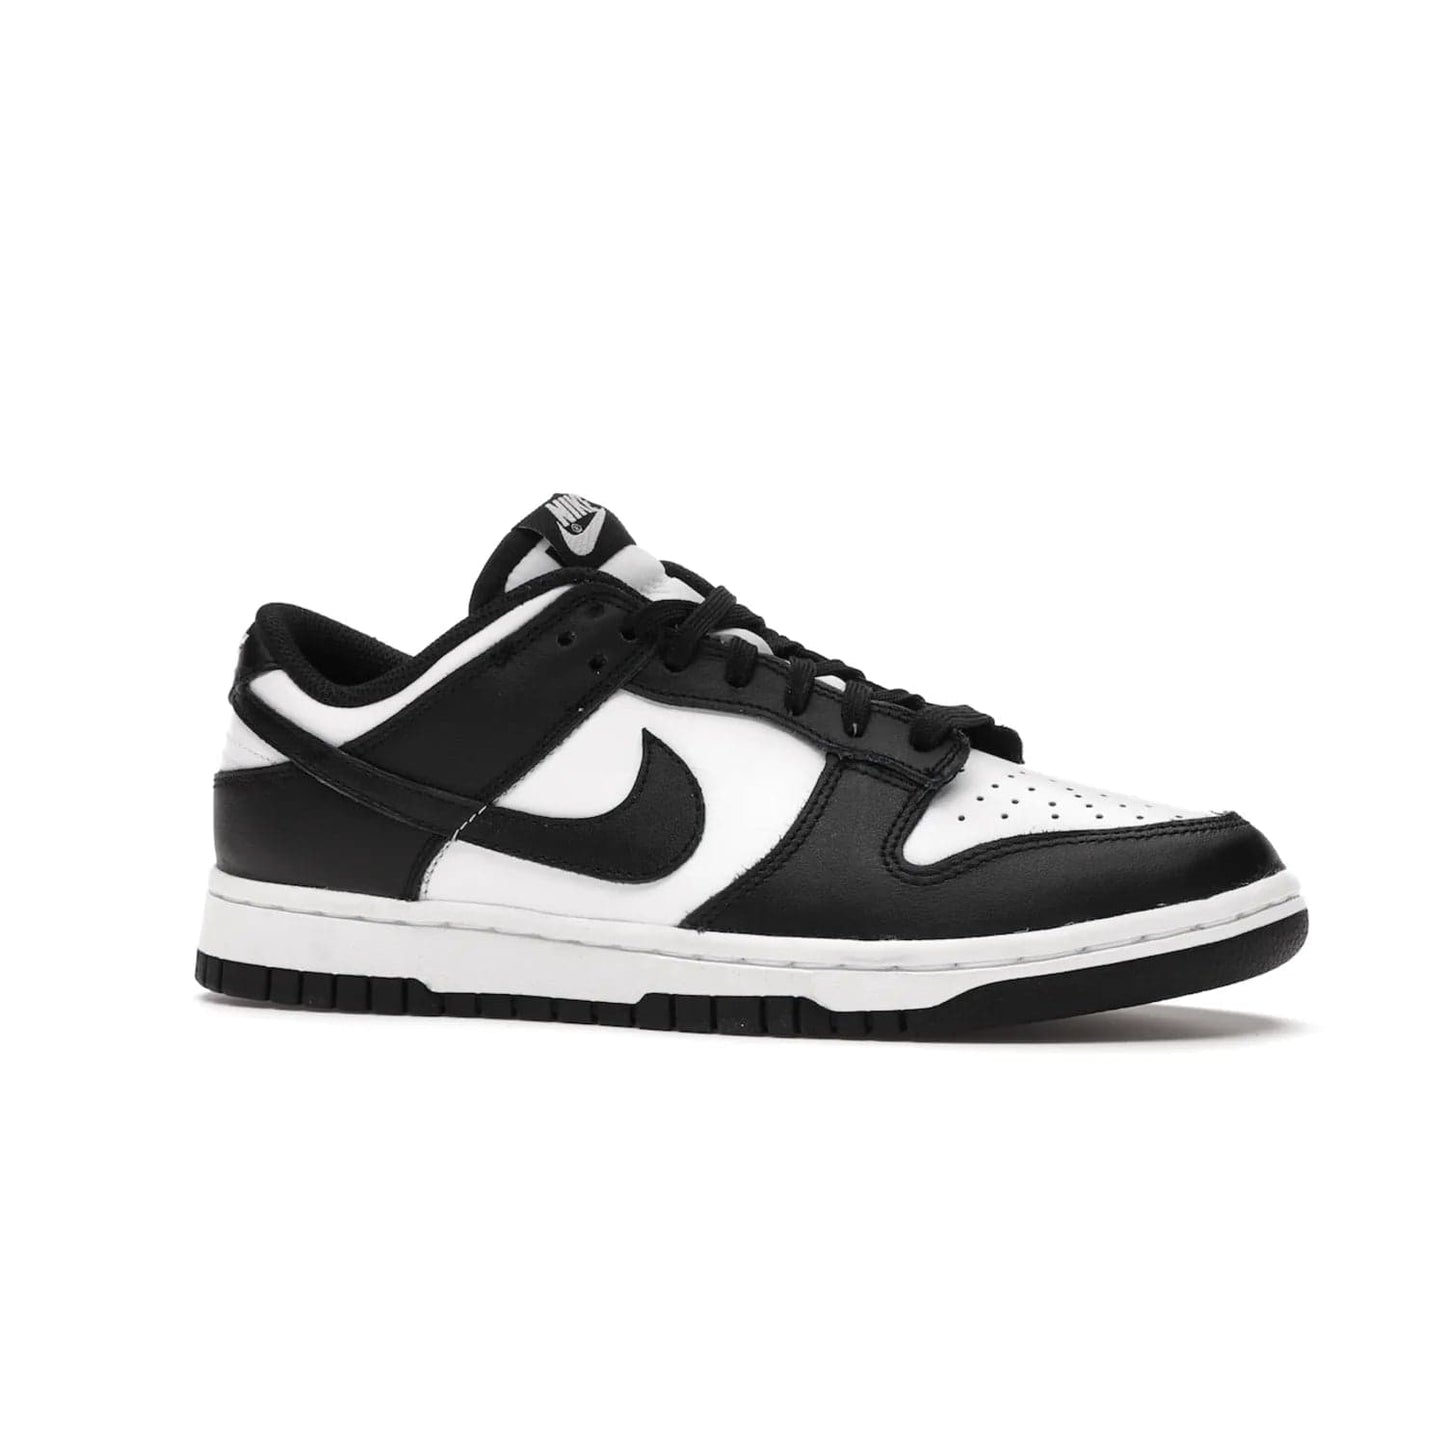 Nike Dunk Low Retro White Black Panda (2021) (Women's) - Image 3 - Only at www.BallersClubKickz.com - Say hello to the new Nike Dunk Low Retro White Black Panda (2021) (Women's)! White & black leather upper with Nike Swoosh logo. Get your pair for $100 in March 2021! Shop now!